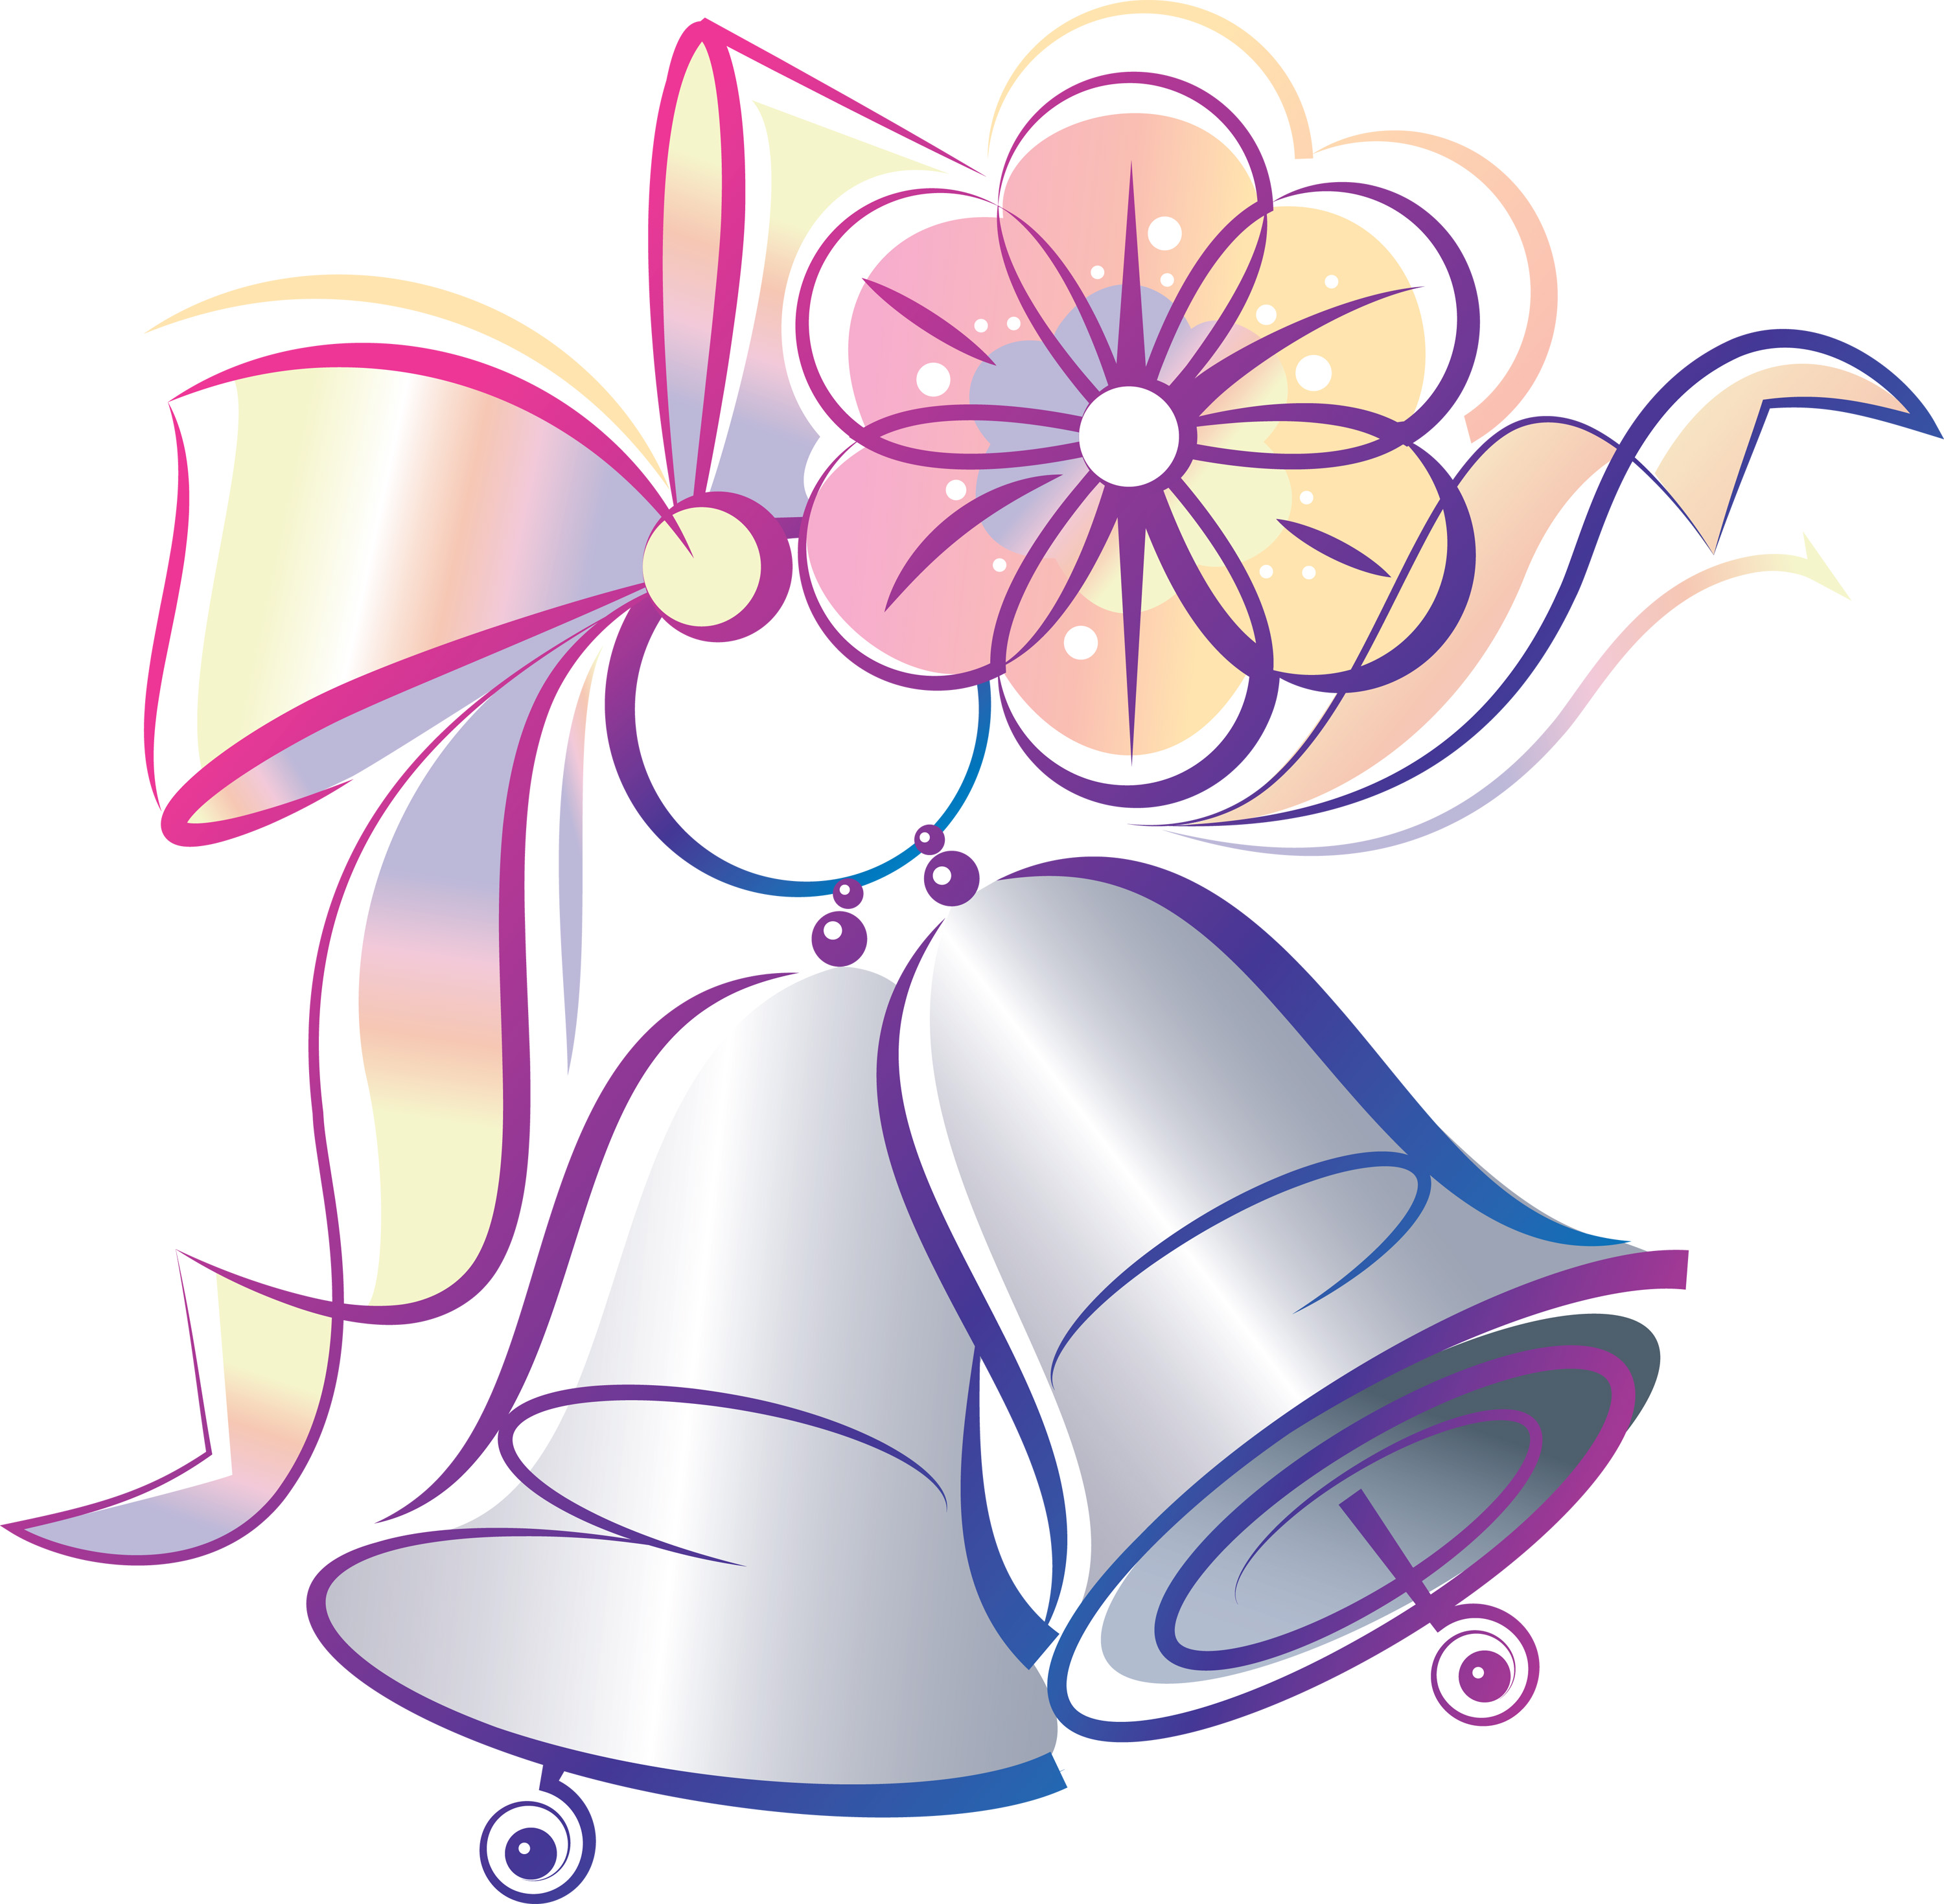 Free Wedding Bell, Download Free Clip Art, Free Clip Art on